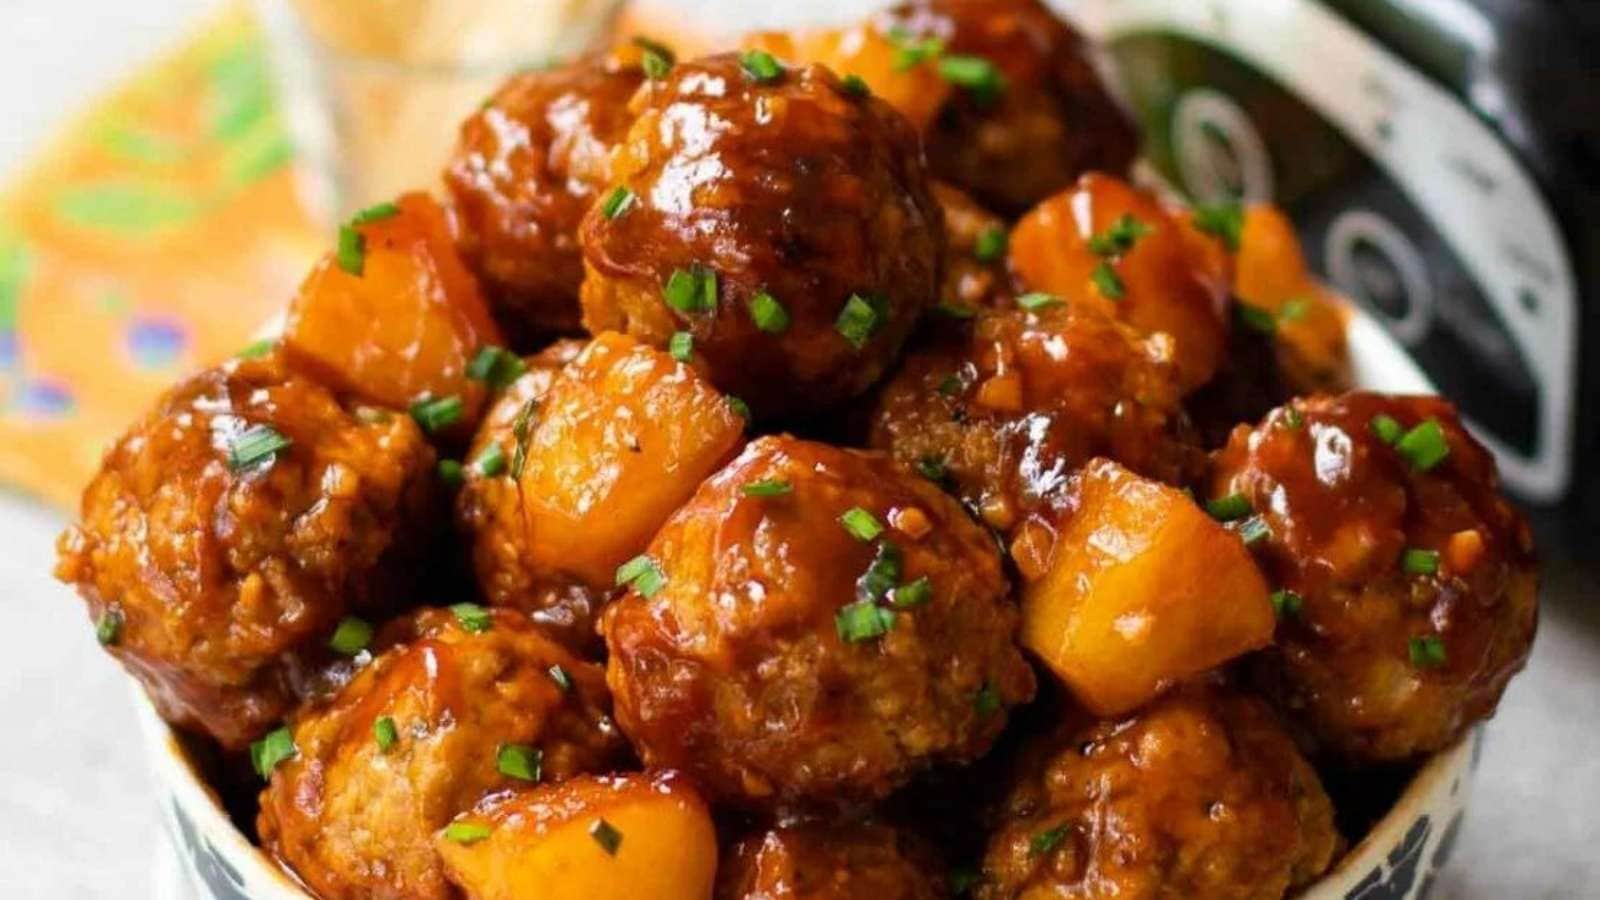 A bowl of meatballs with pineapple sauce.